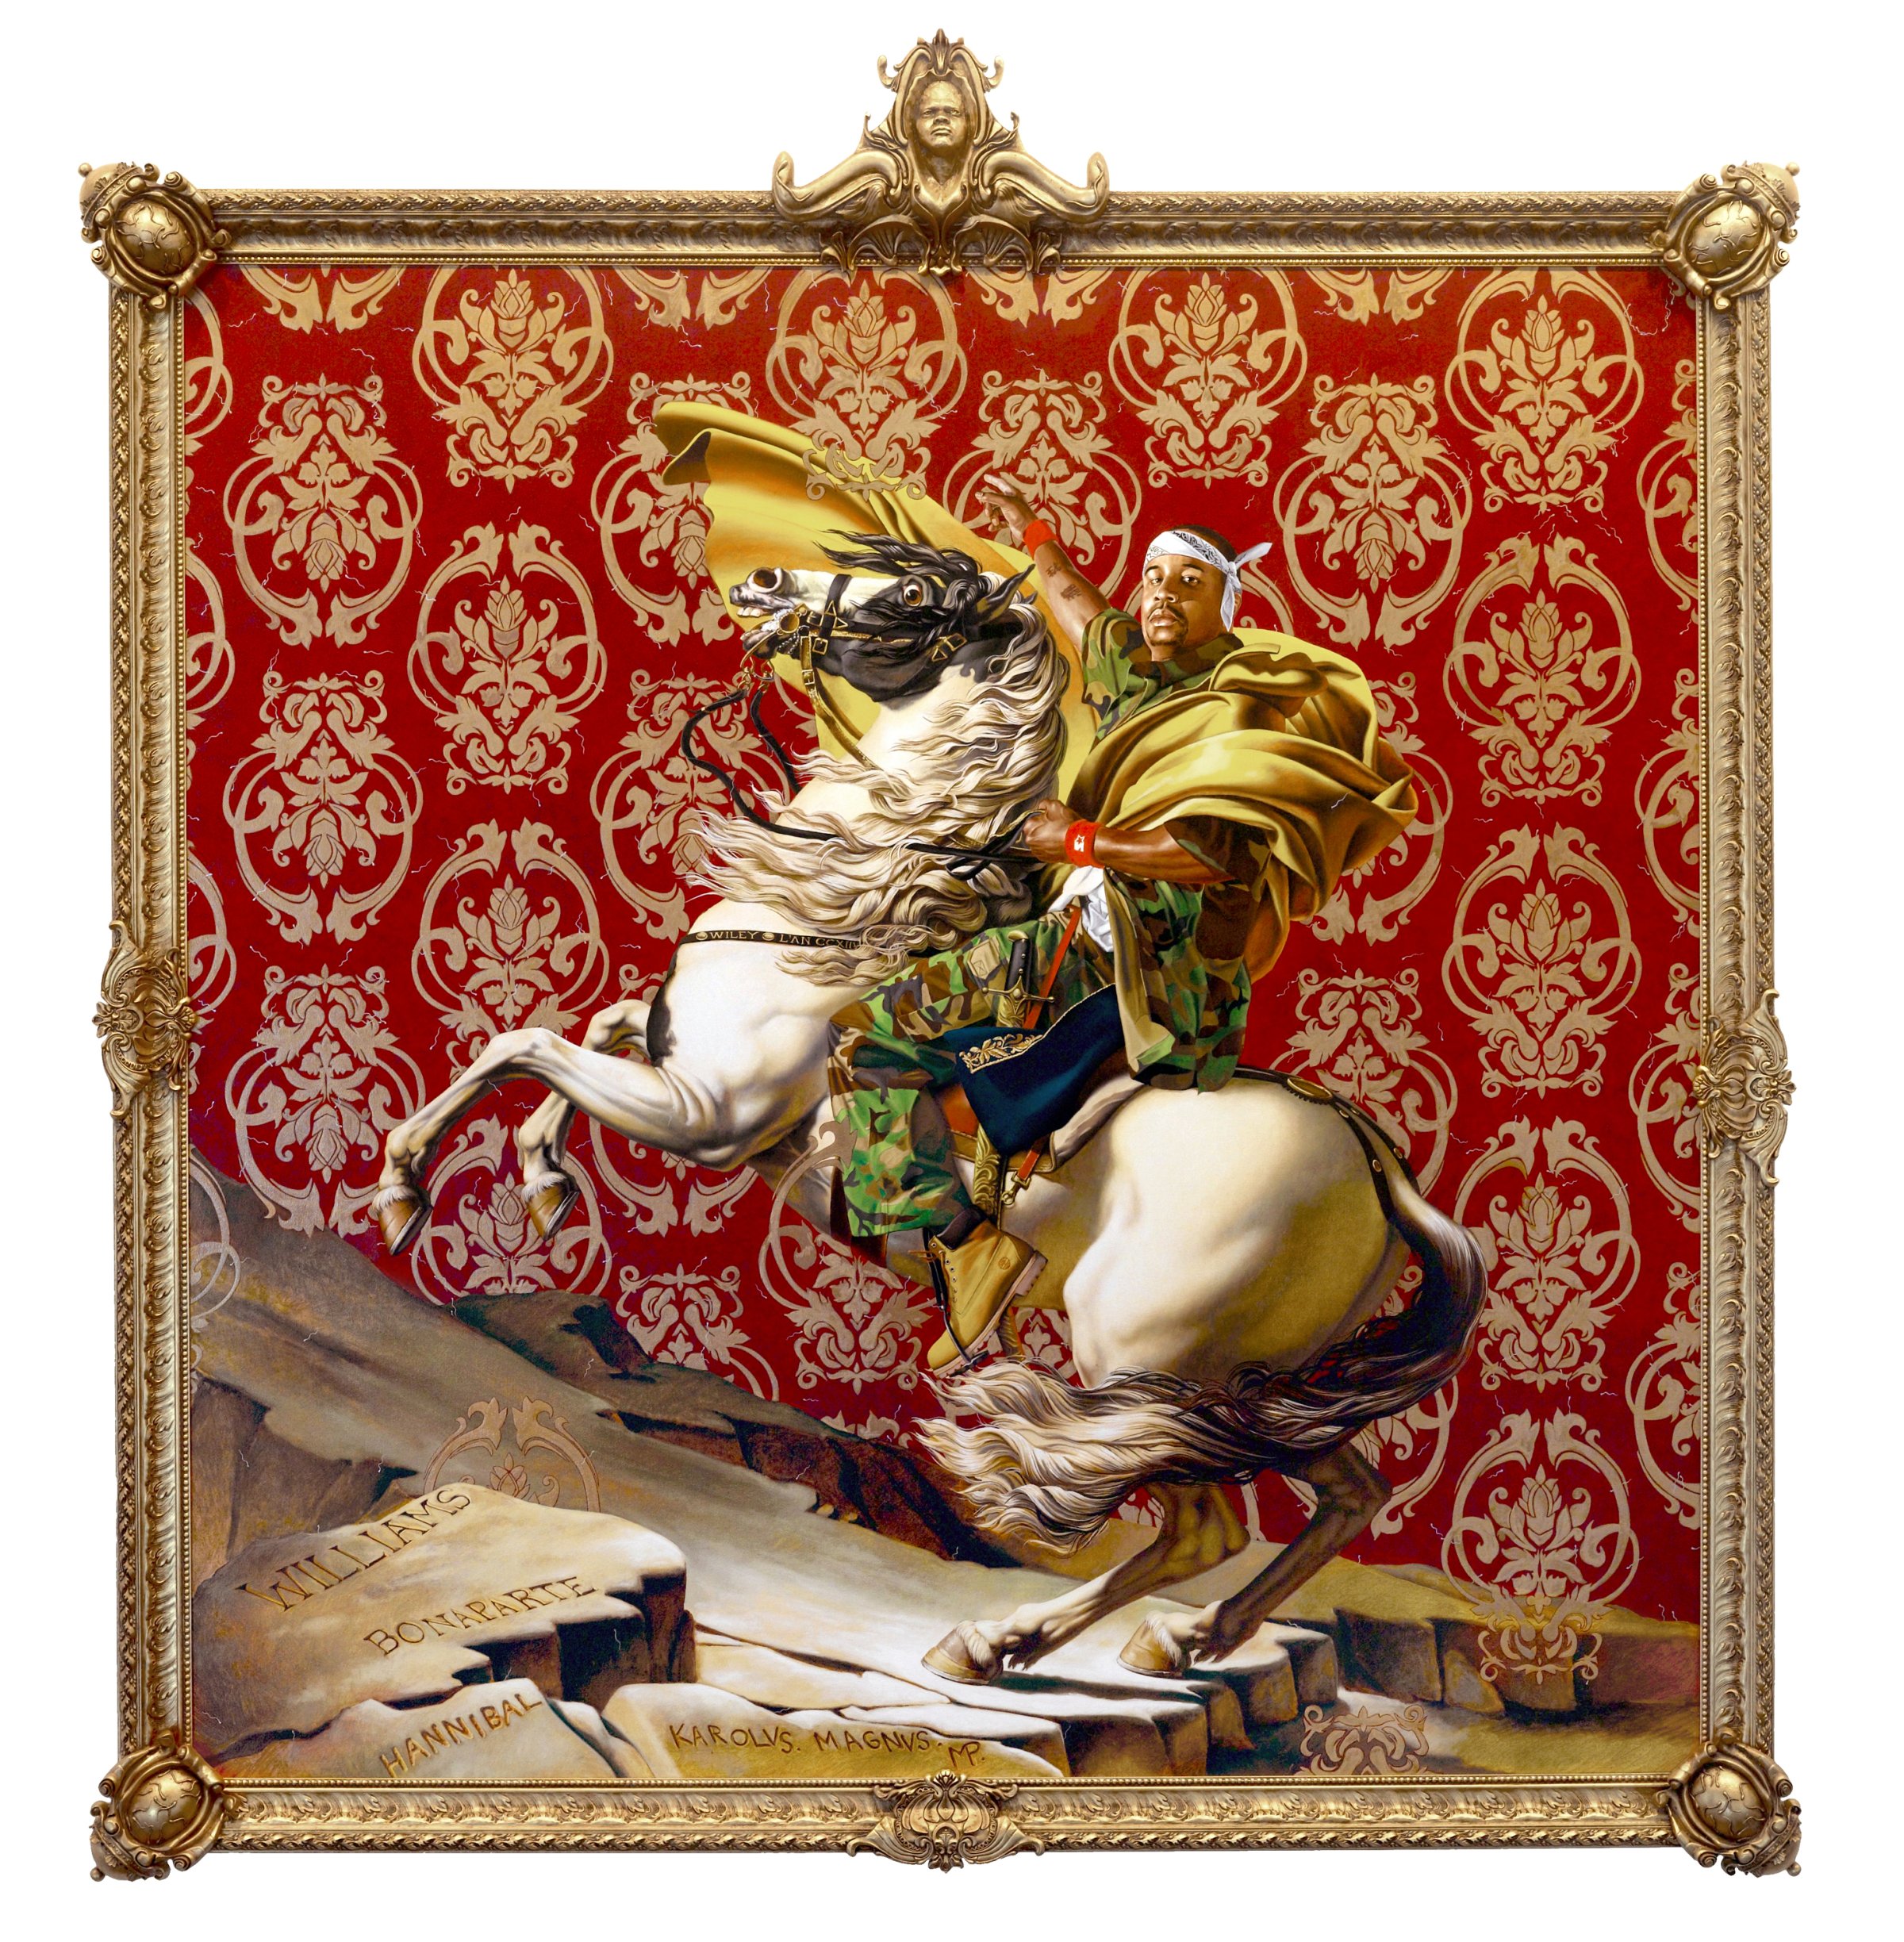 The Royal Treatment: Kehinde Wiley's street-chic update of the Old Masters